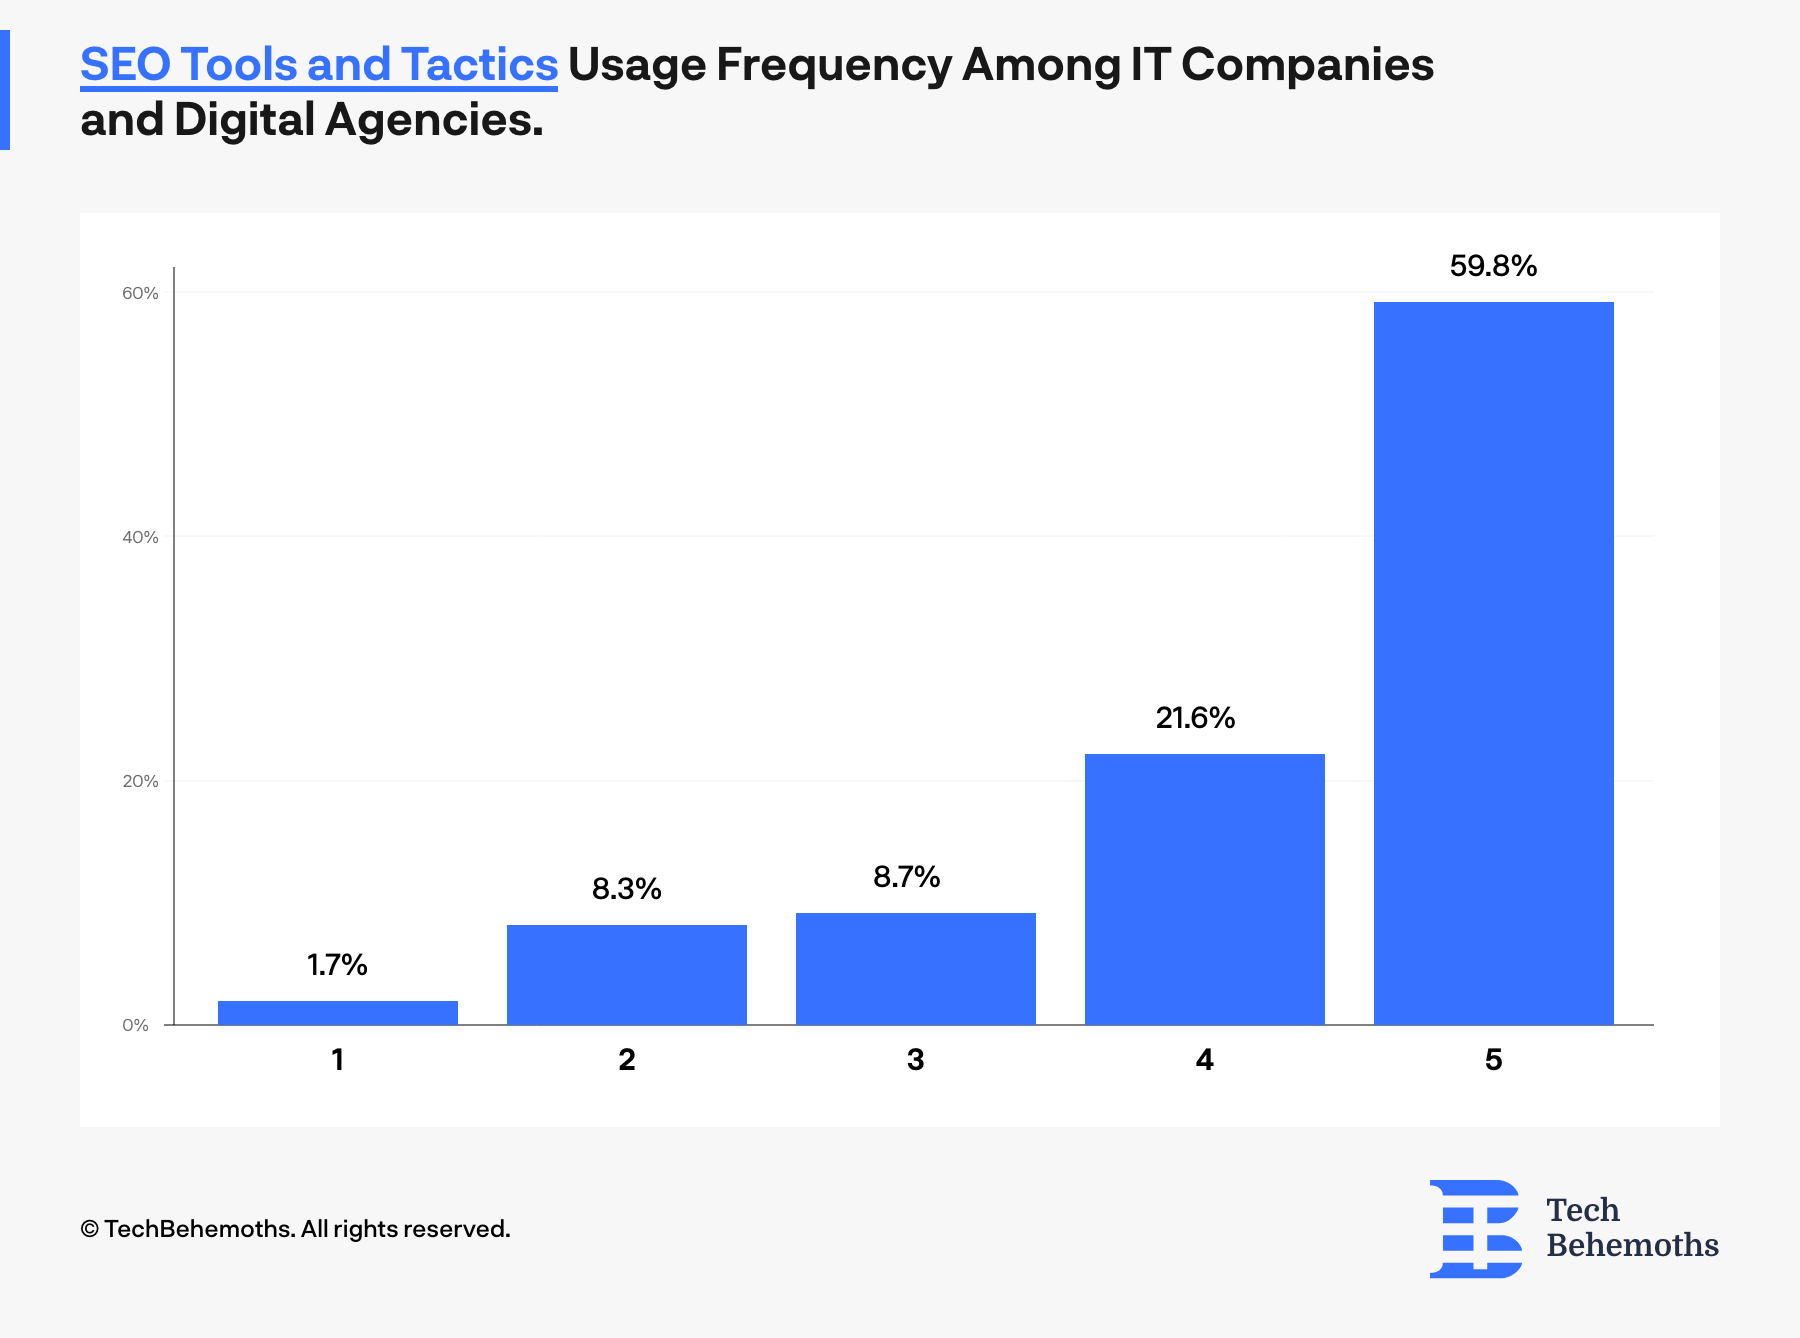 Frequency of SEO Tools and tactics in IT companies and digital agencies